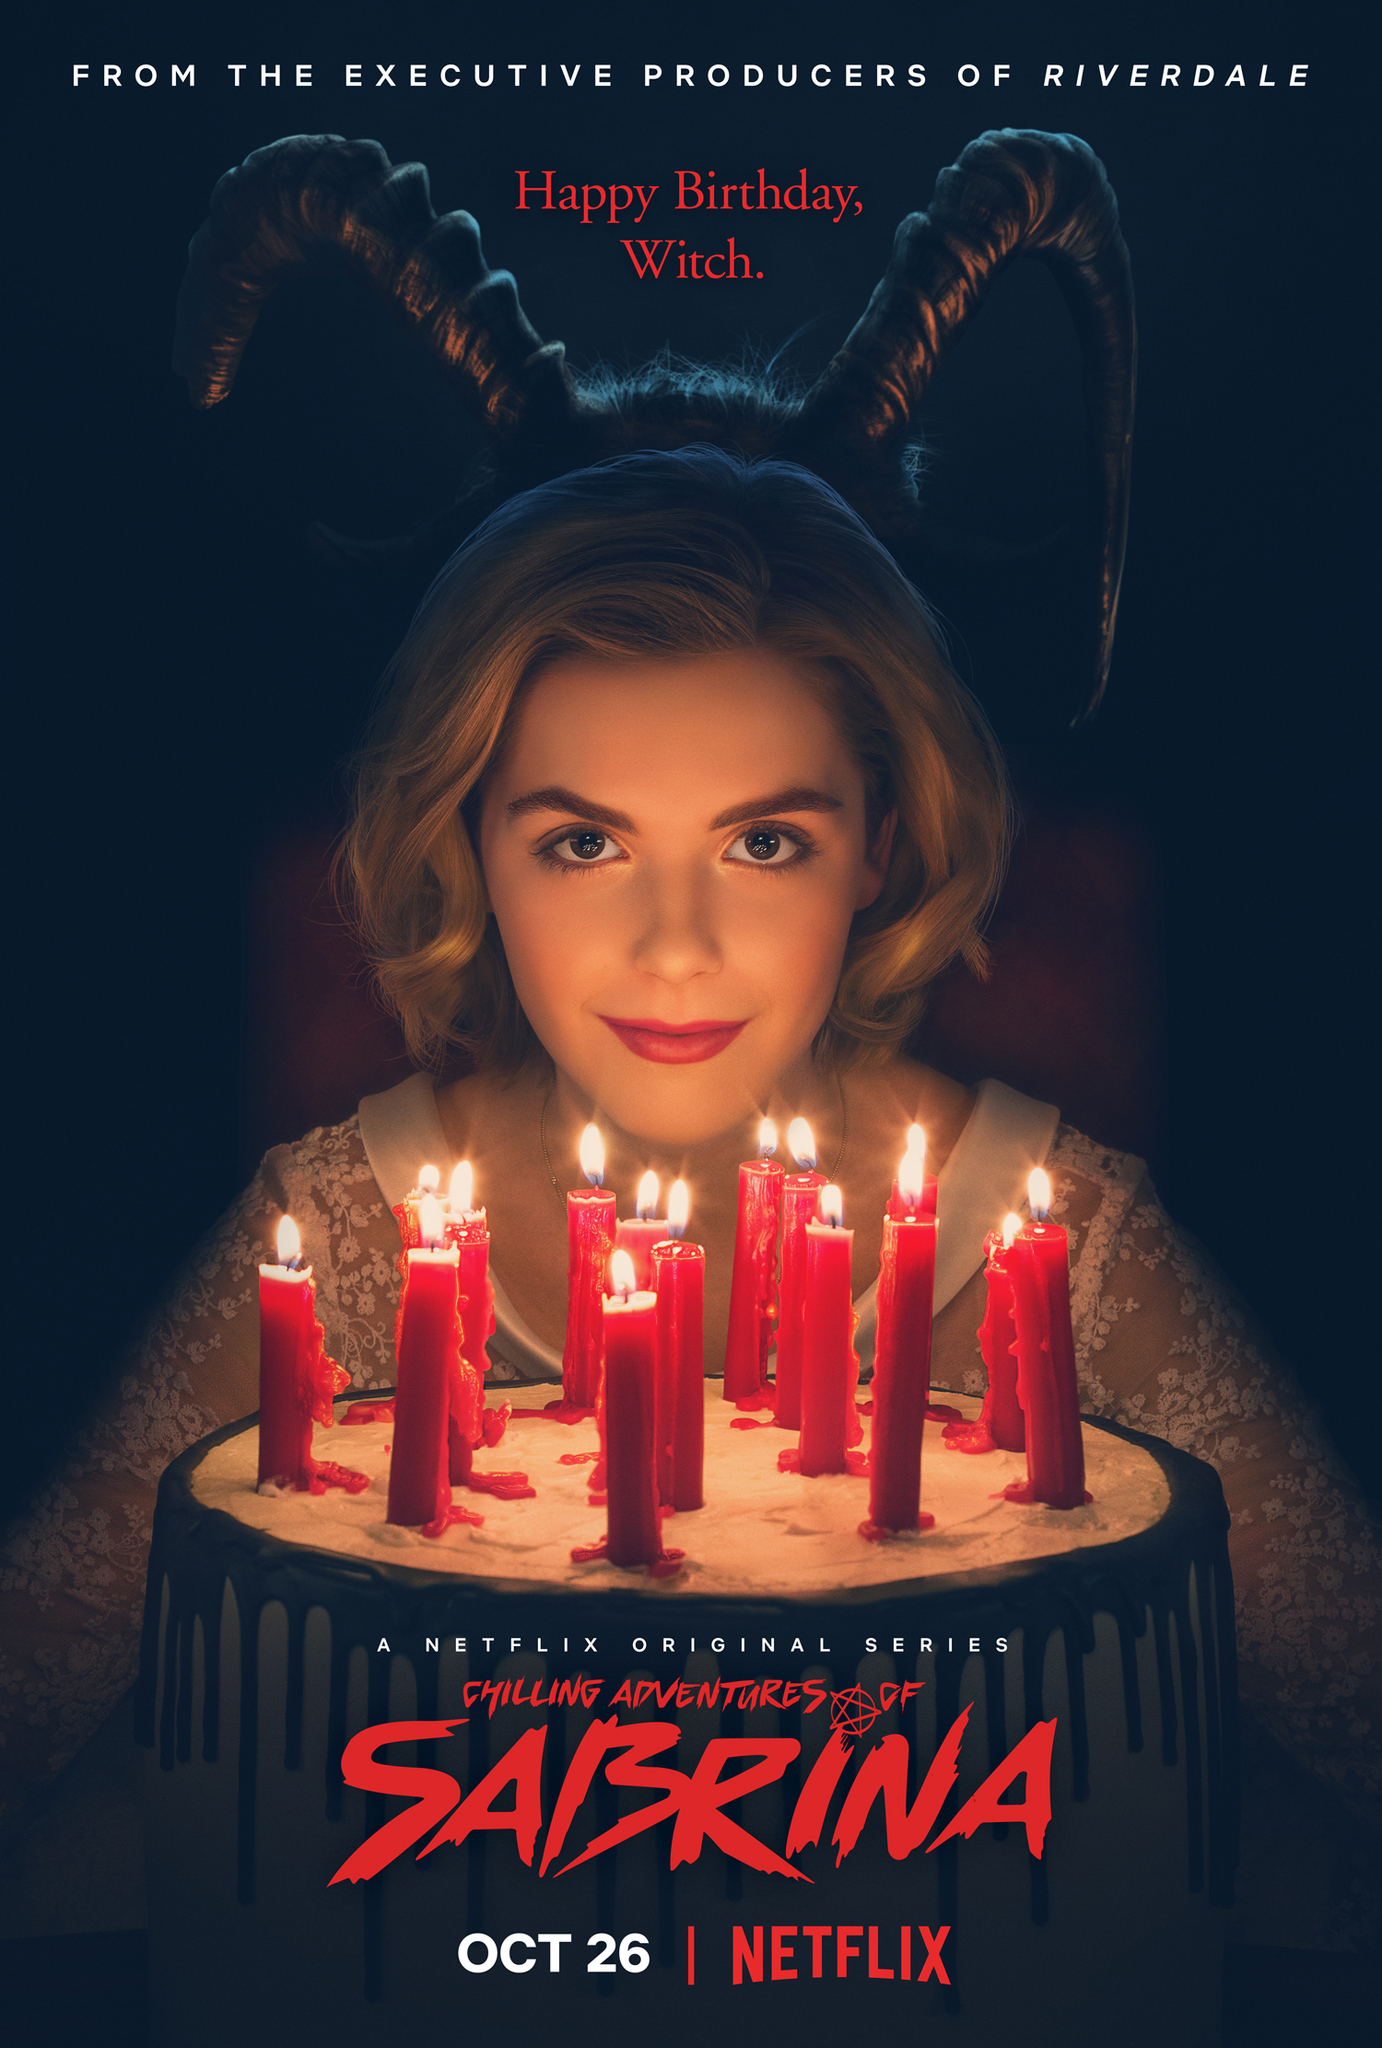 Chilling Adventures of Sabrina The Teenage Witch Poster